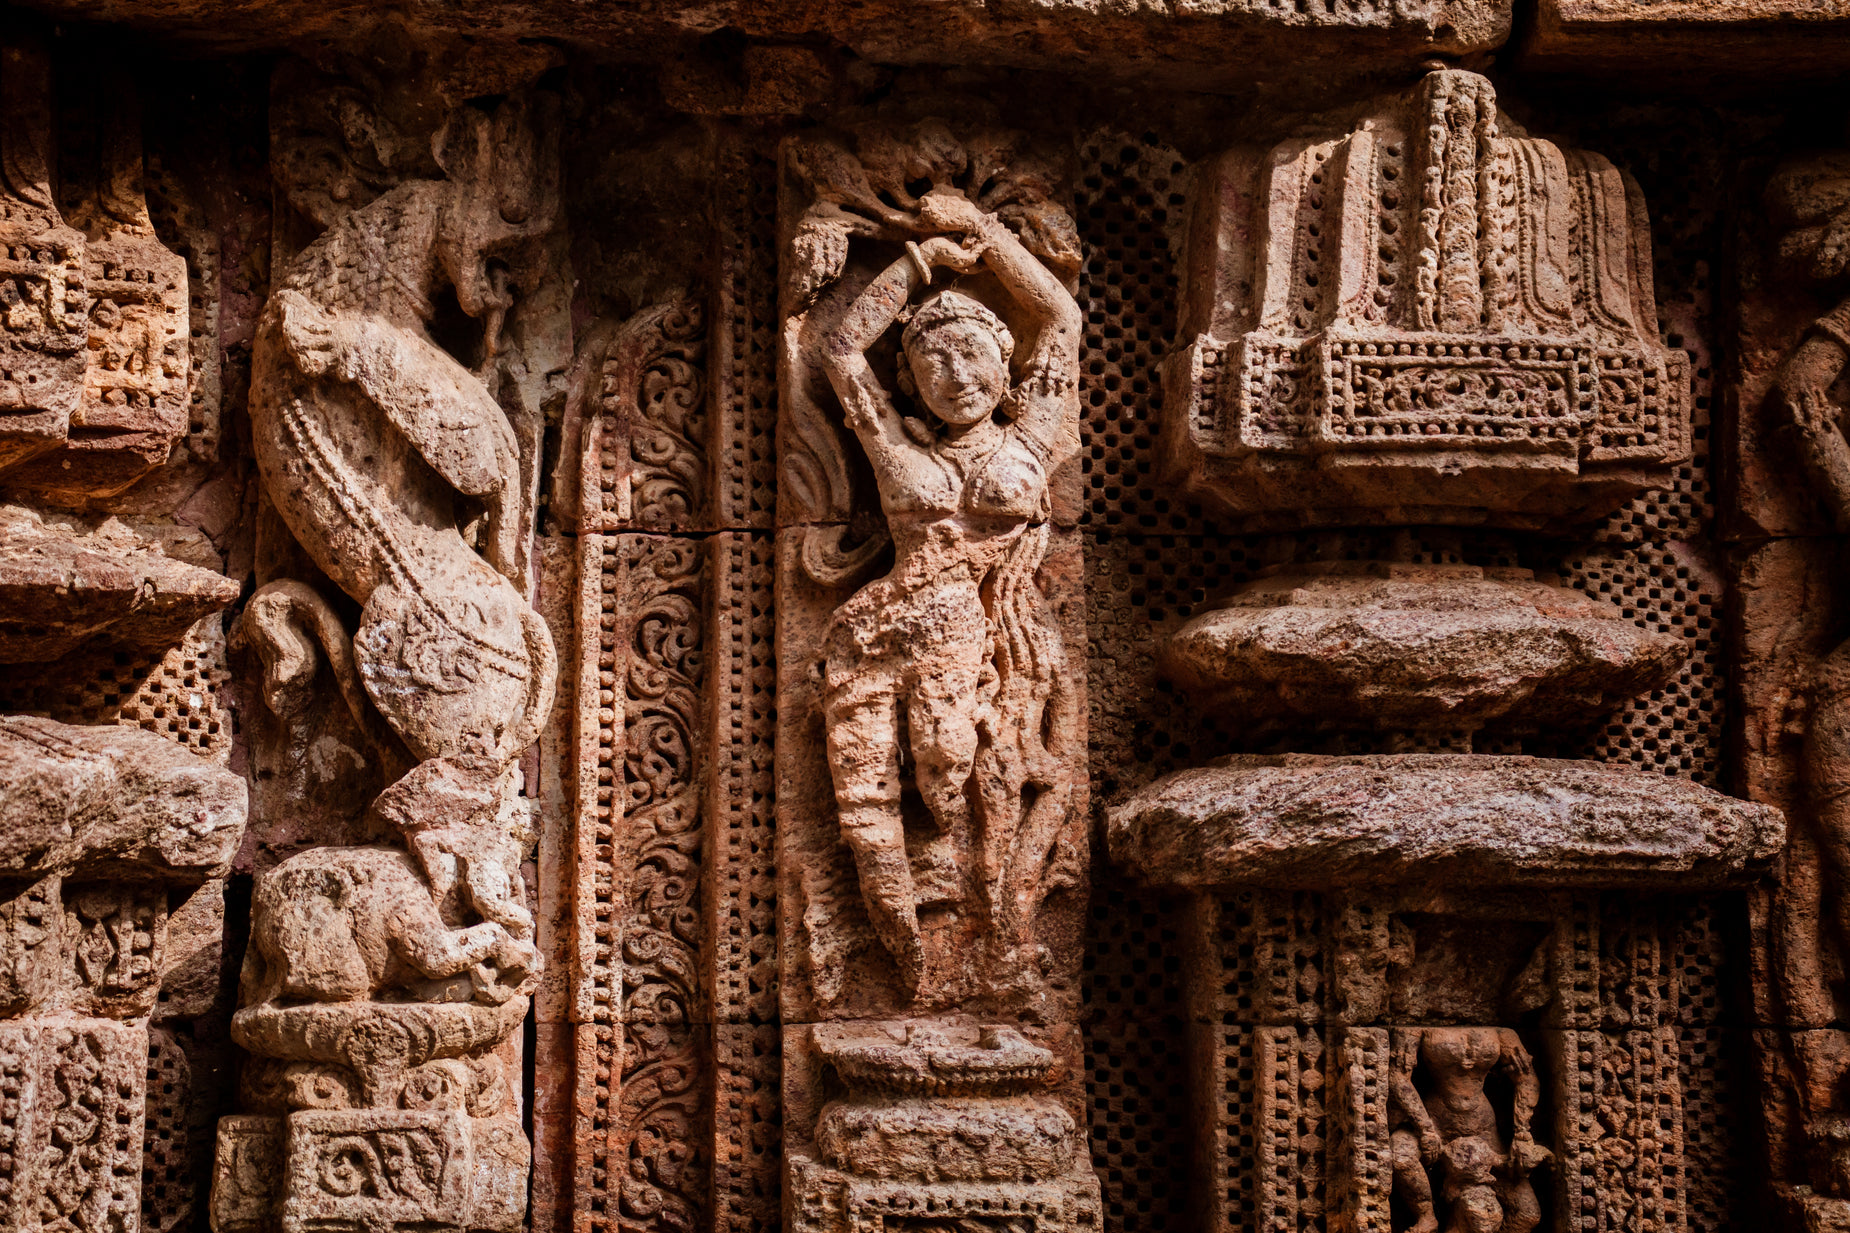 carvings adorning the wall of a temple in india